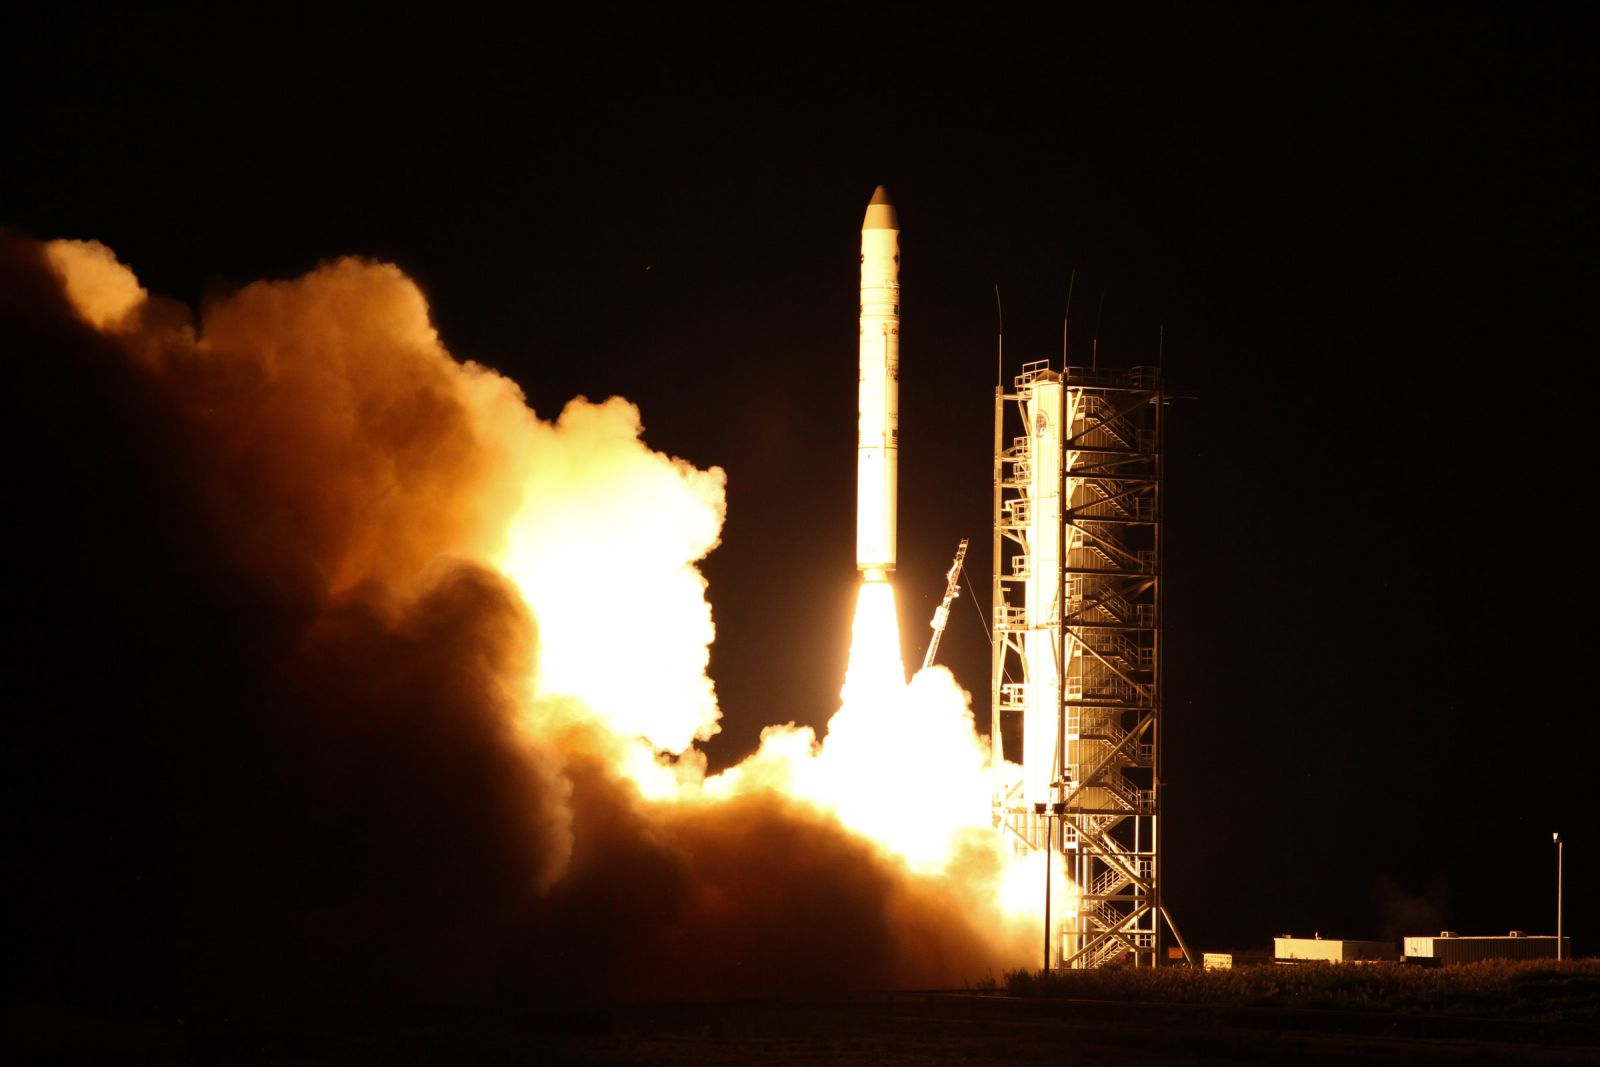 LADEE space mission launched on its way toward the Moon